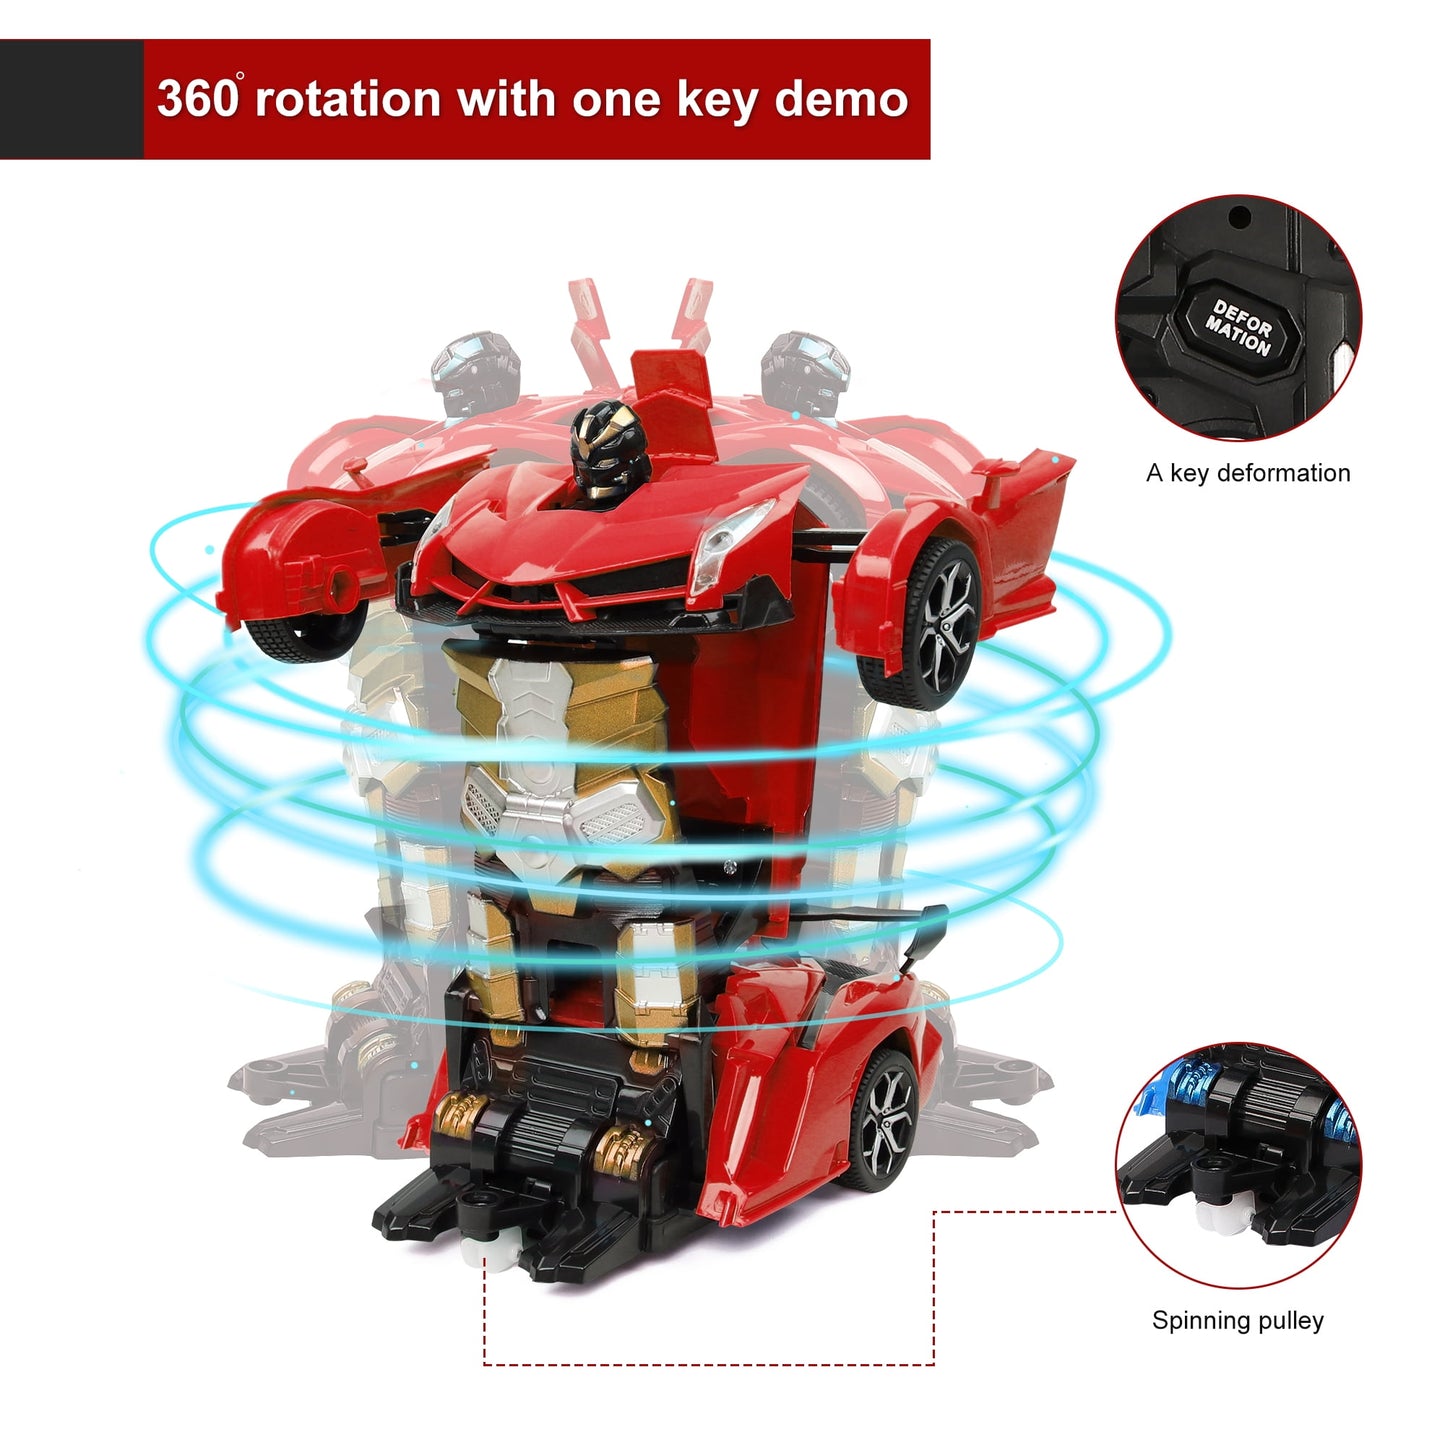 Remote Control Car,Transform Robot Toys 1:18 RC Cars for Kids,Red, 2.4Ghz 360°Rotating Stunt Race Car Toys for Kids Boys 5-8.